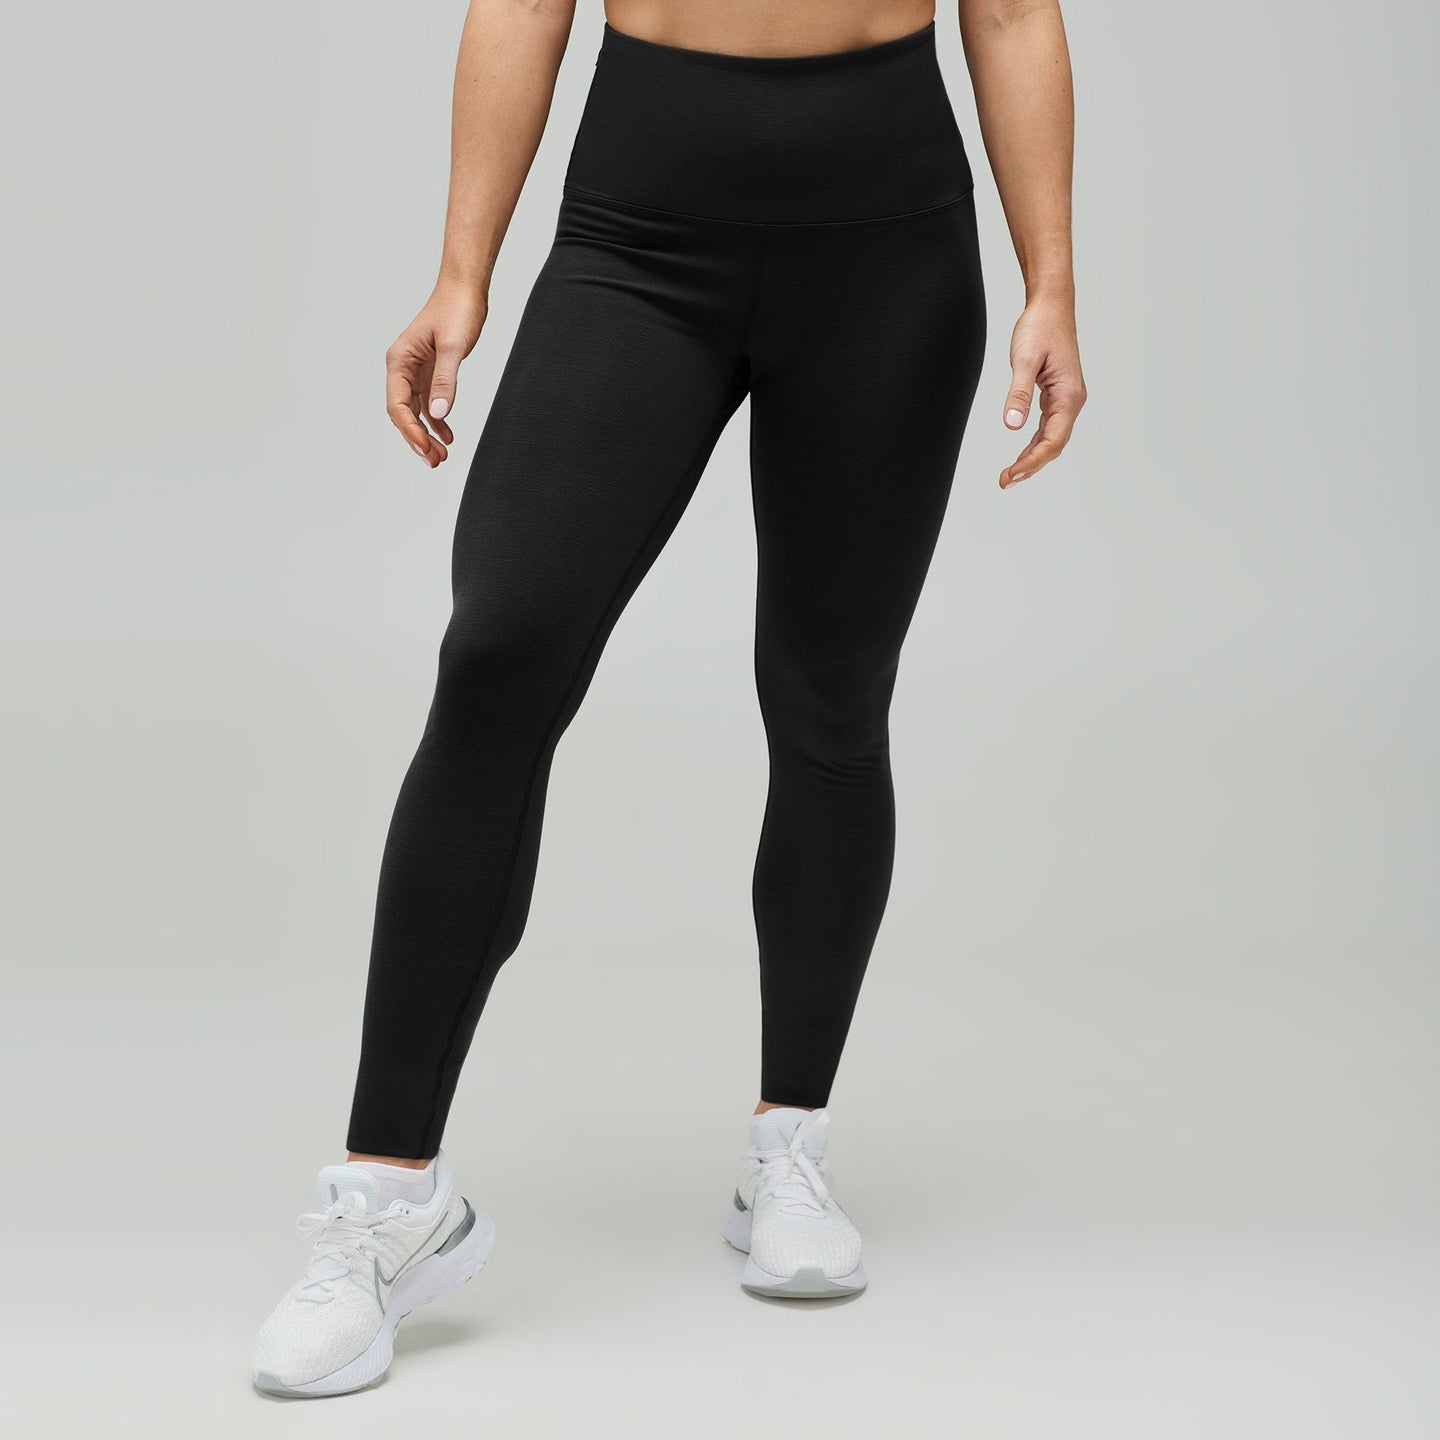 Black Leggings - Buy latest online collection of Black Leggings in India at  Best Wholesale Price